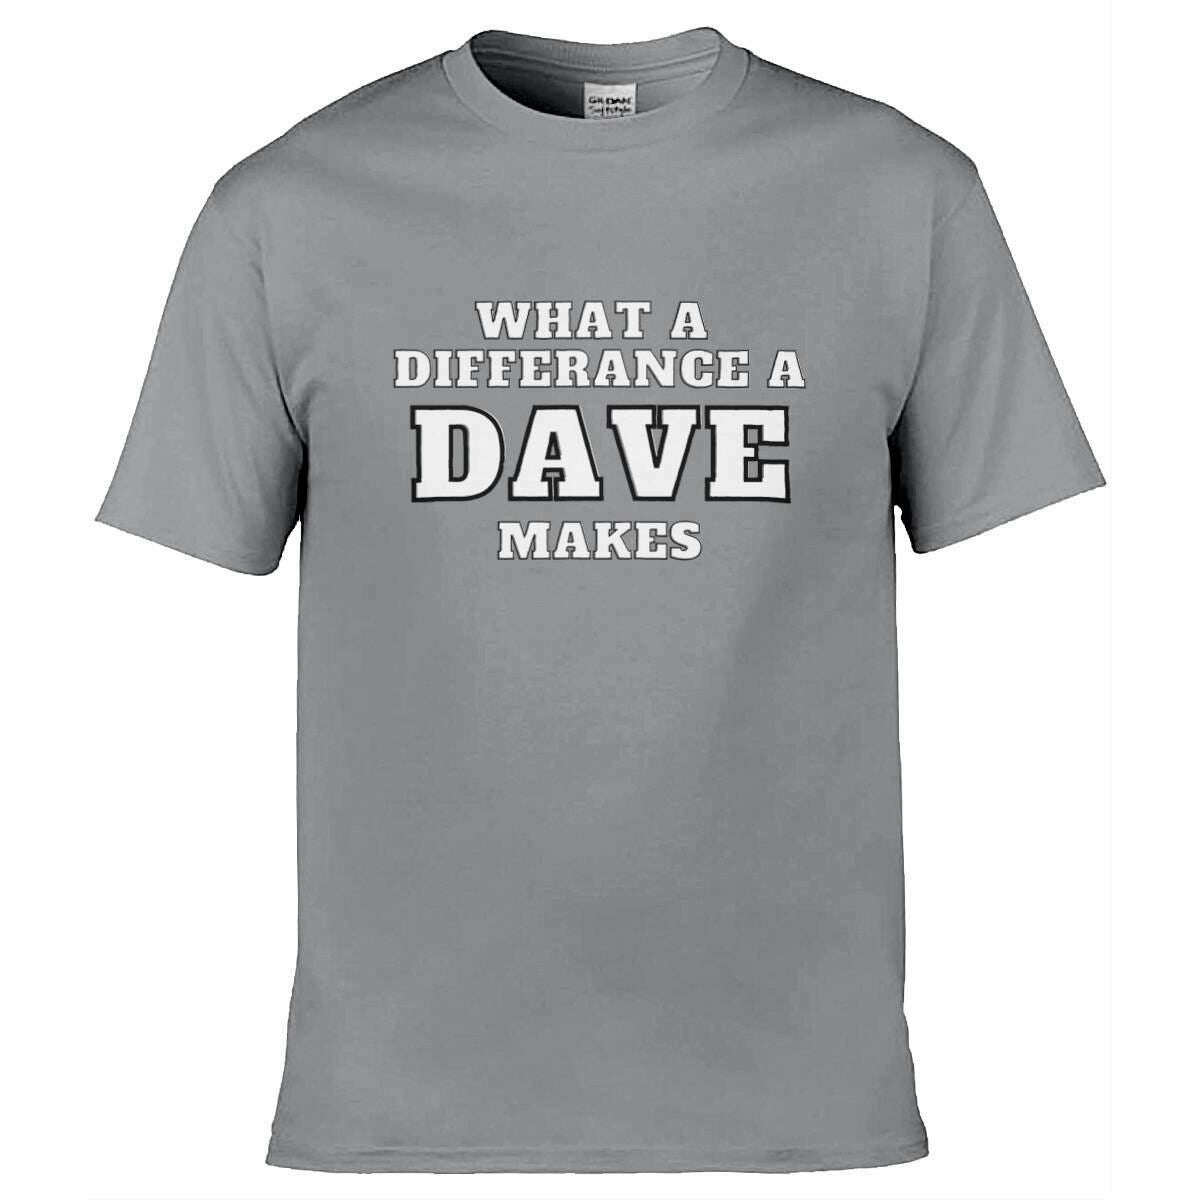 Teemarkable! What A Difference a Dave Makes T-Shirt